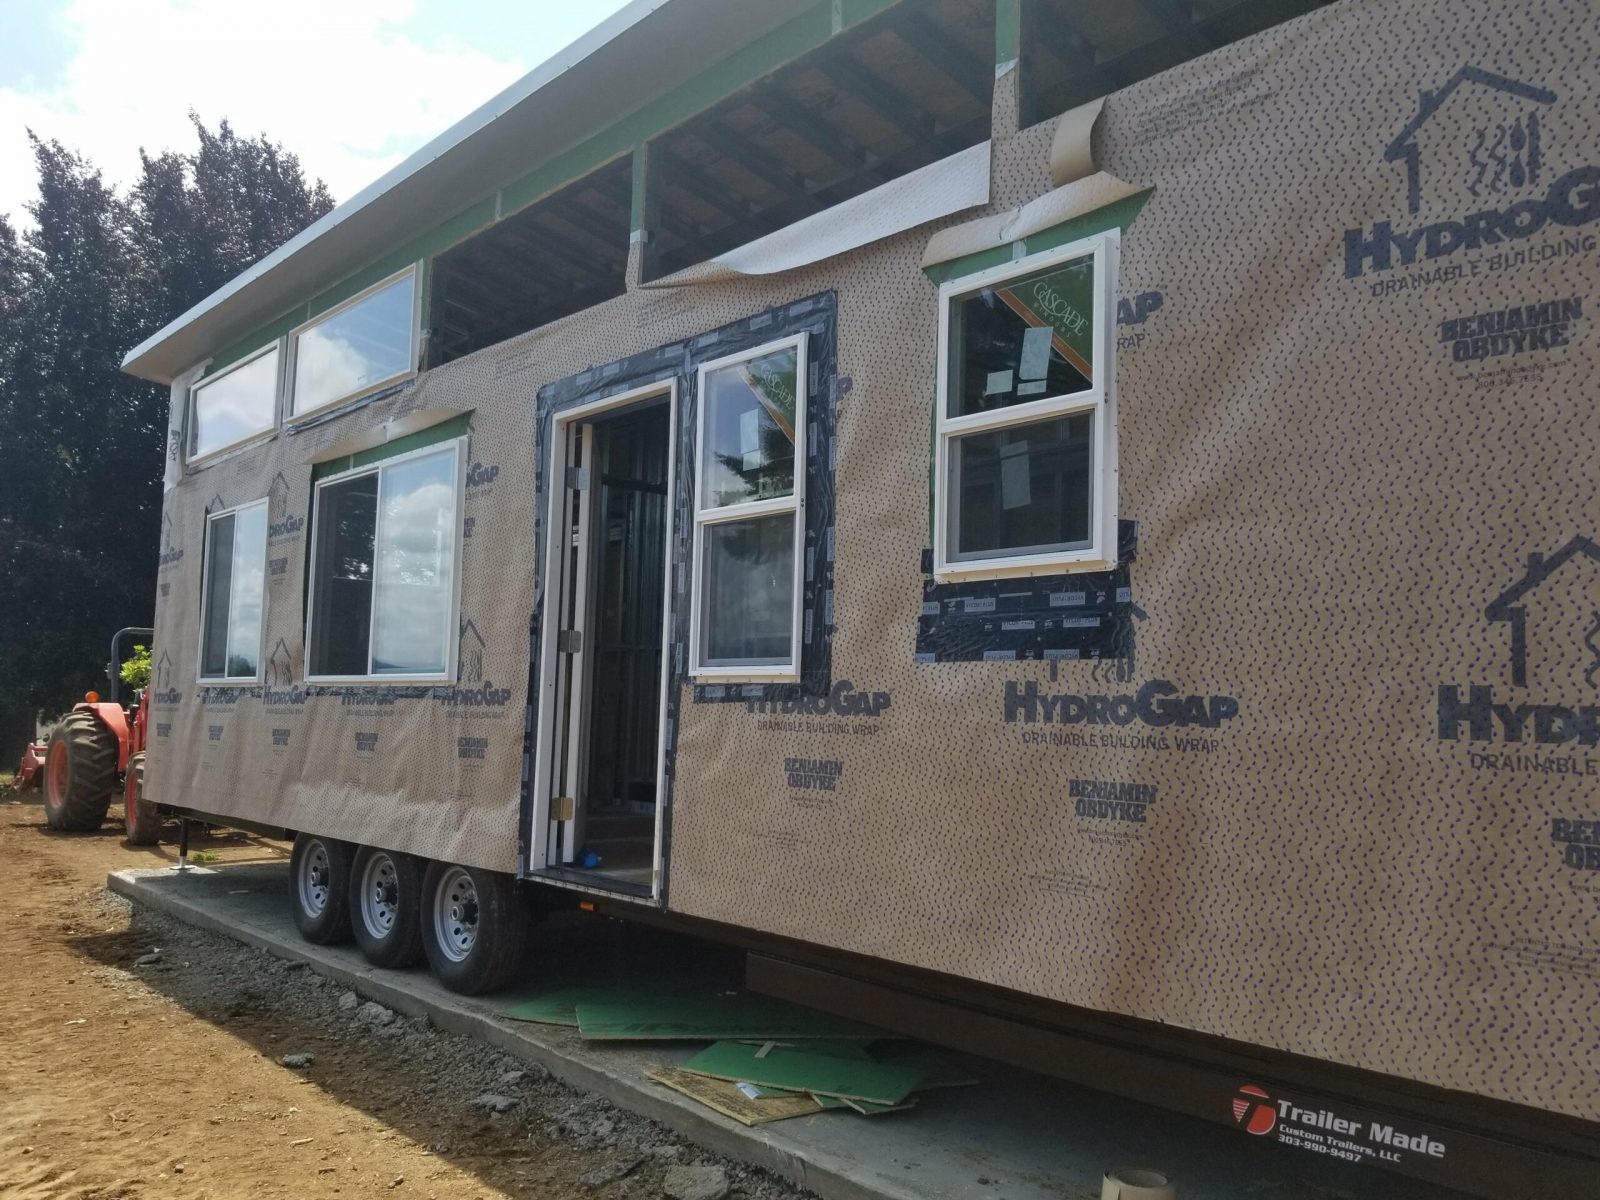 Wrap on the east side of the tiny house